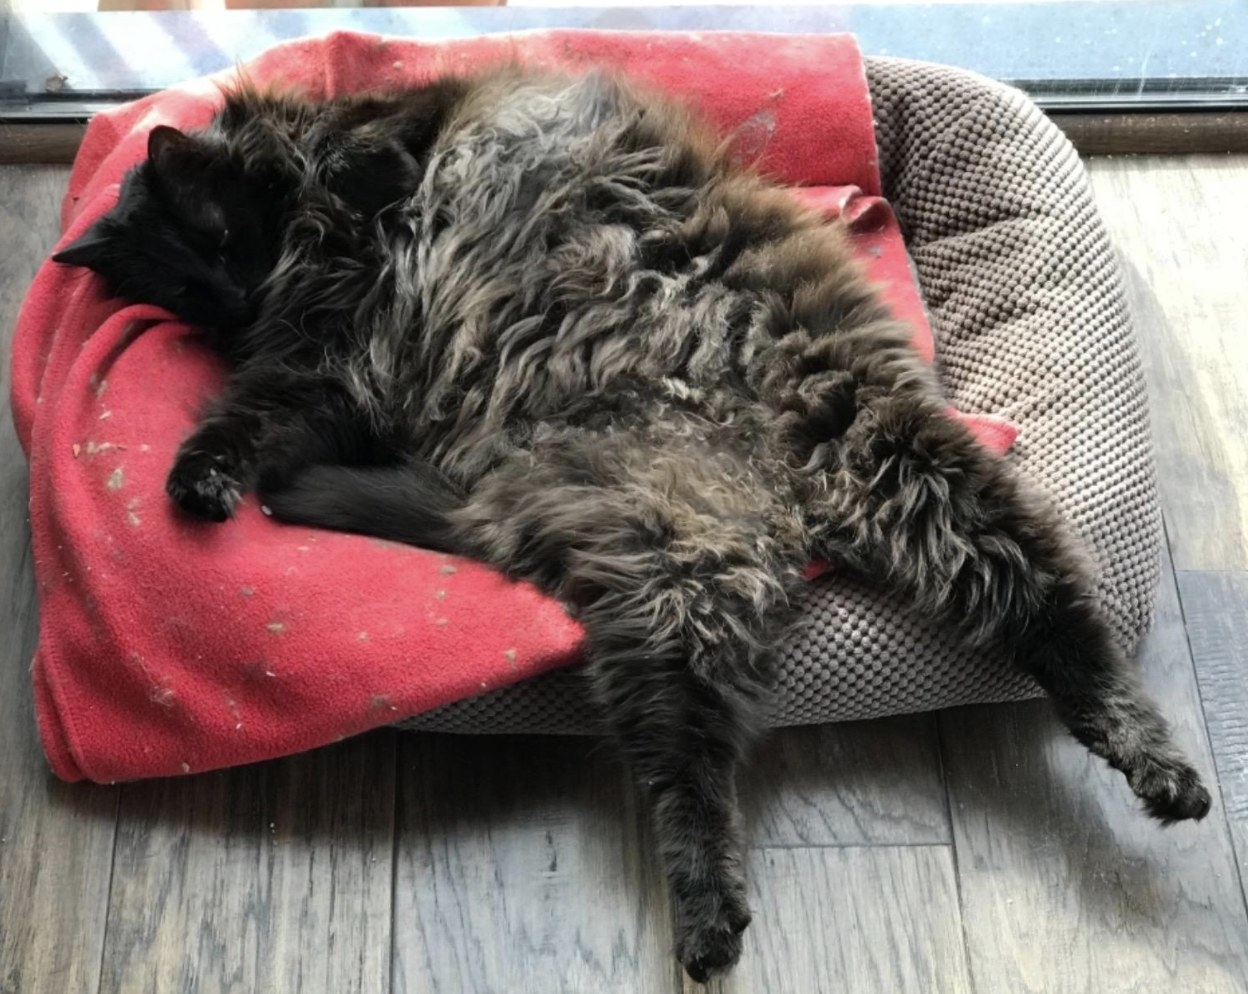 A cat belly up sleeping on a cat bed